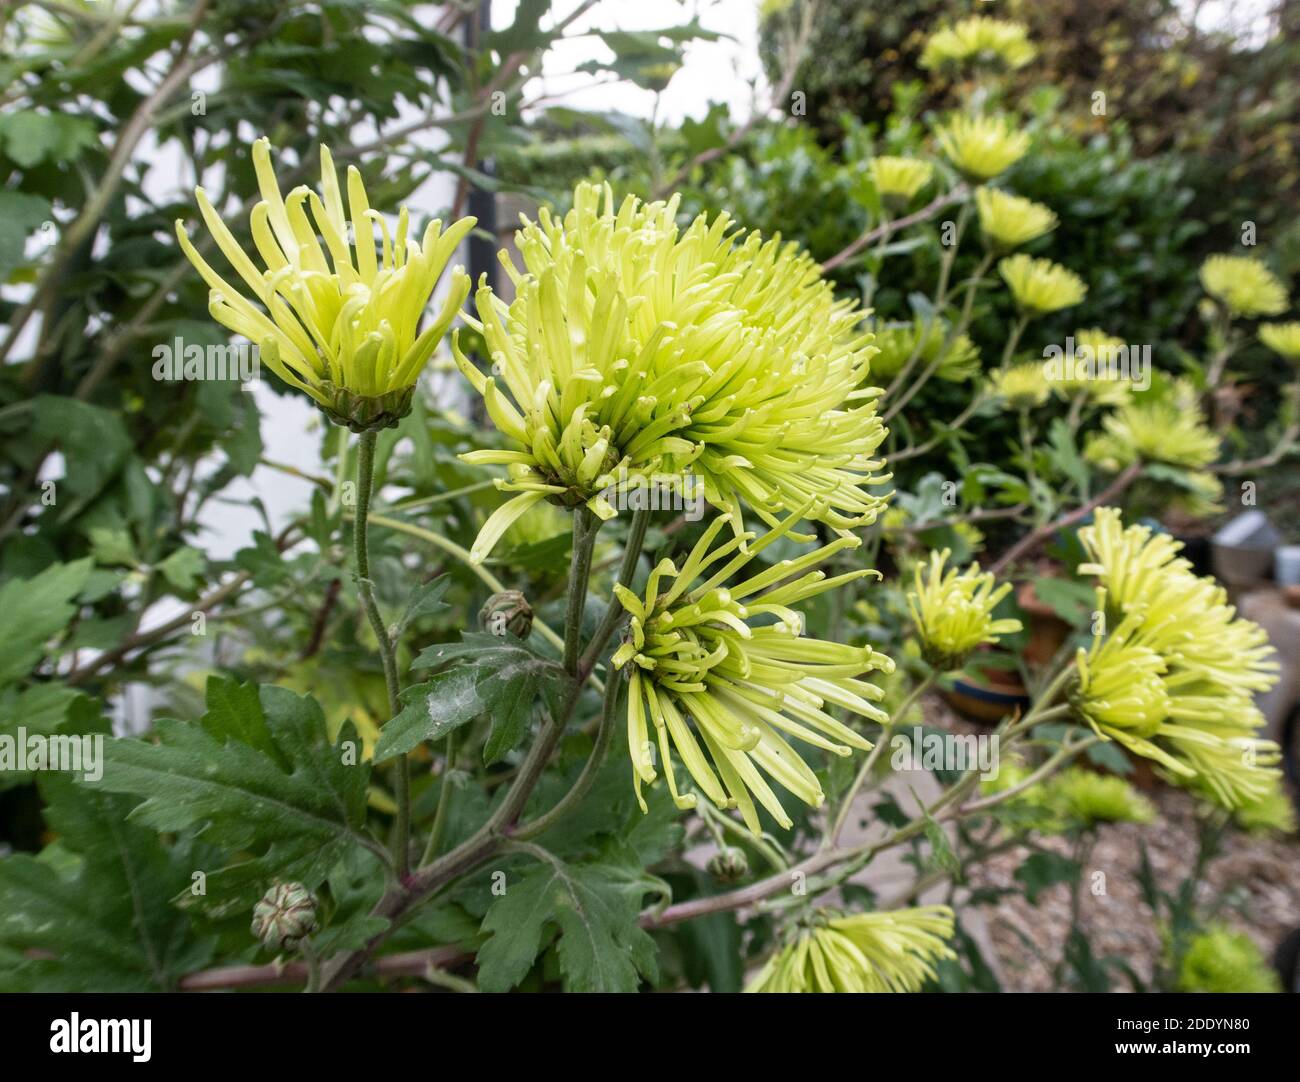 Chrysanthemum Anastasia Green, a pale green variety useful for flower arranging. Dendranthema Anastasia Green. Spider chrysanthemum Anastasia Green. Stock Photo